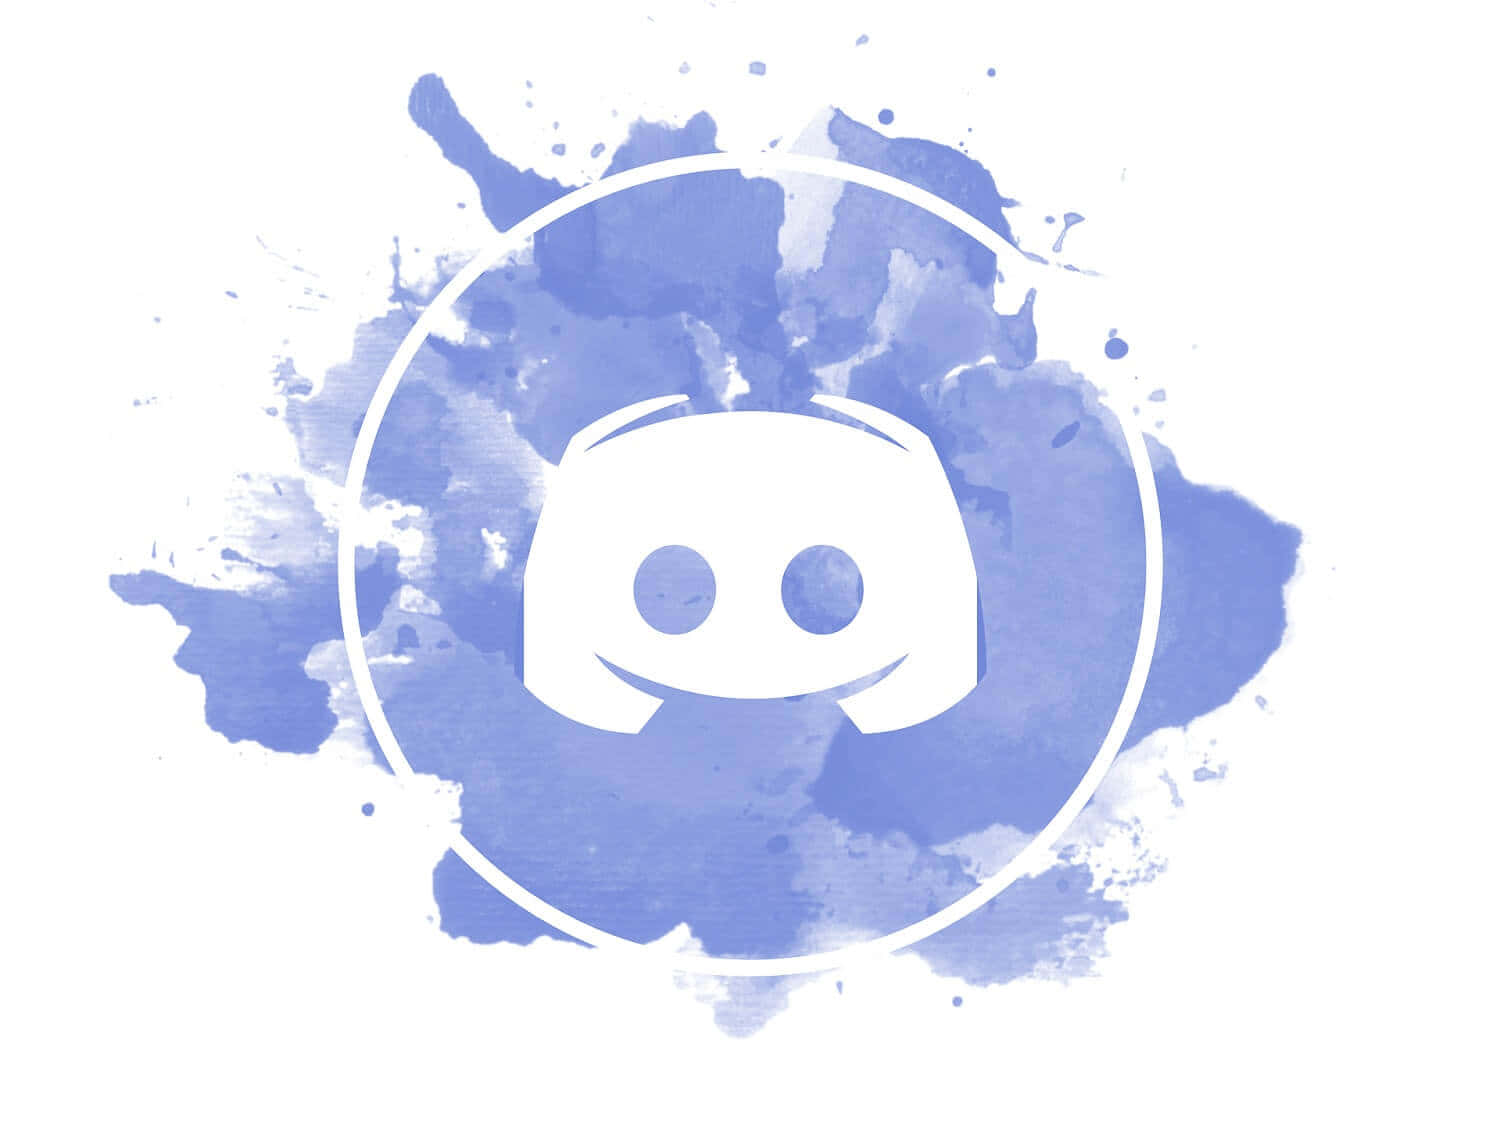 100+] Cool Discord Profile Pictures